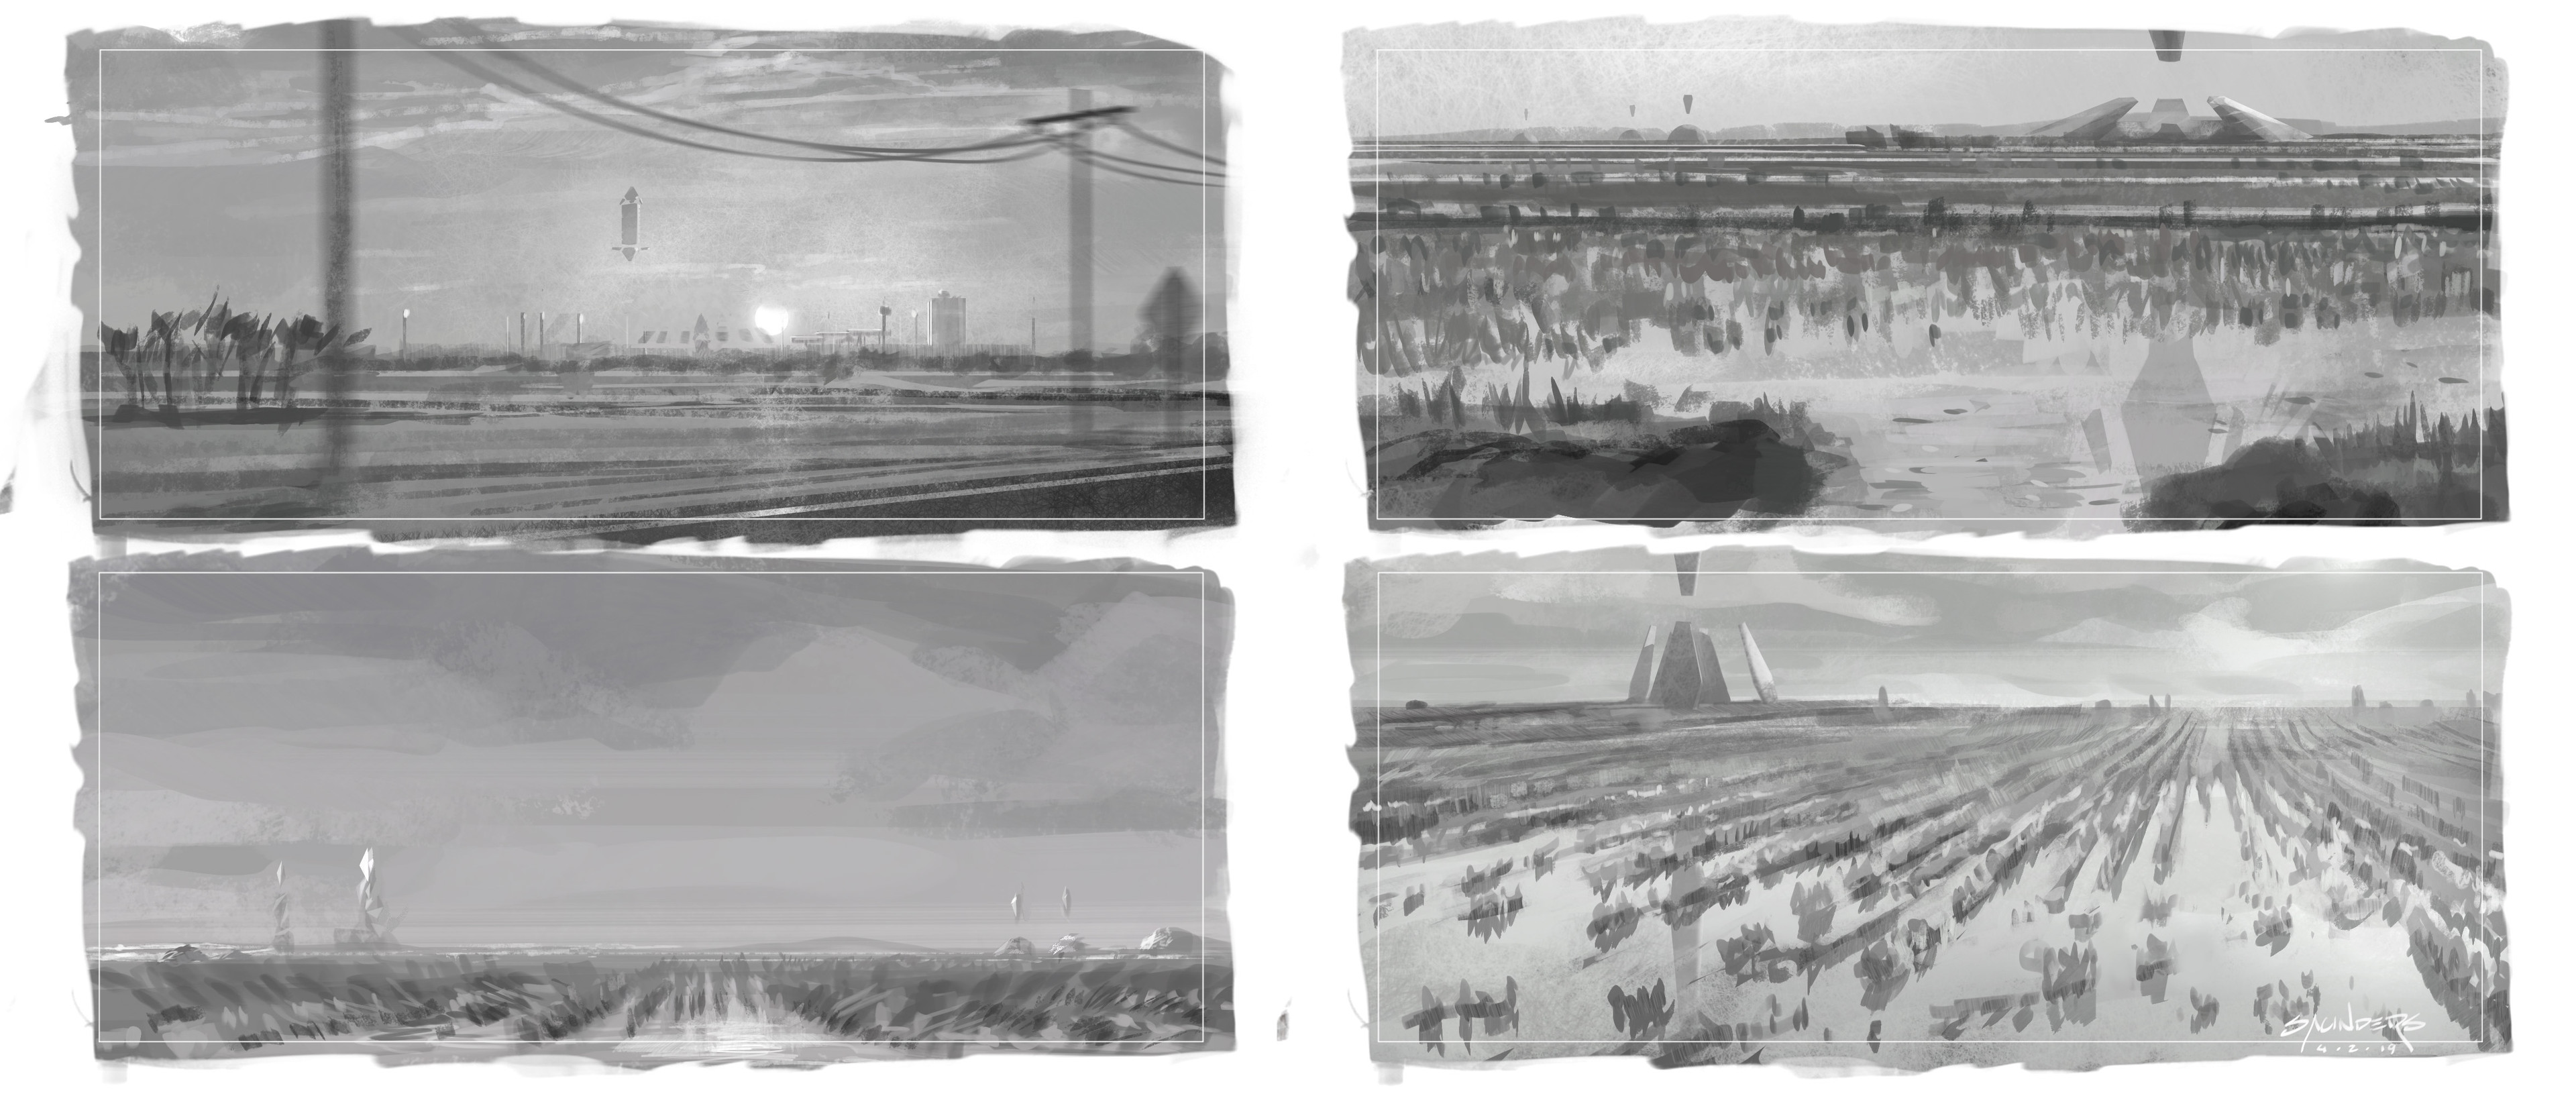 More thumbnails, this time focusing on the landscape, with the alien structures incongruously contrasted in the distance. 